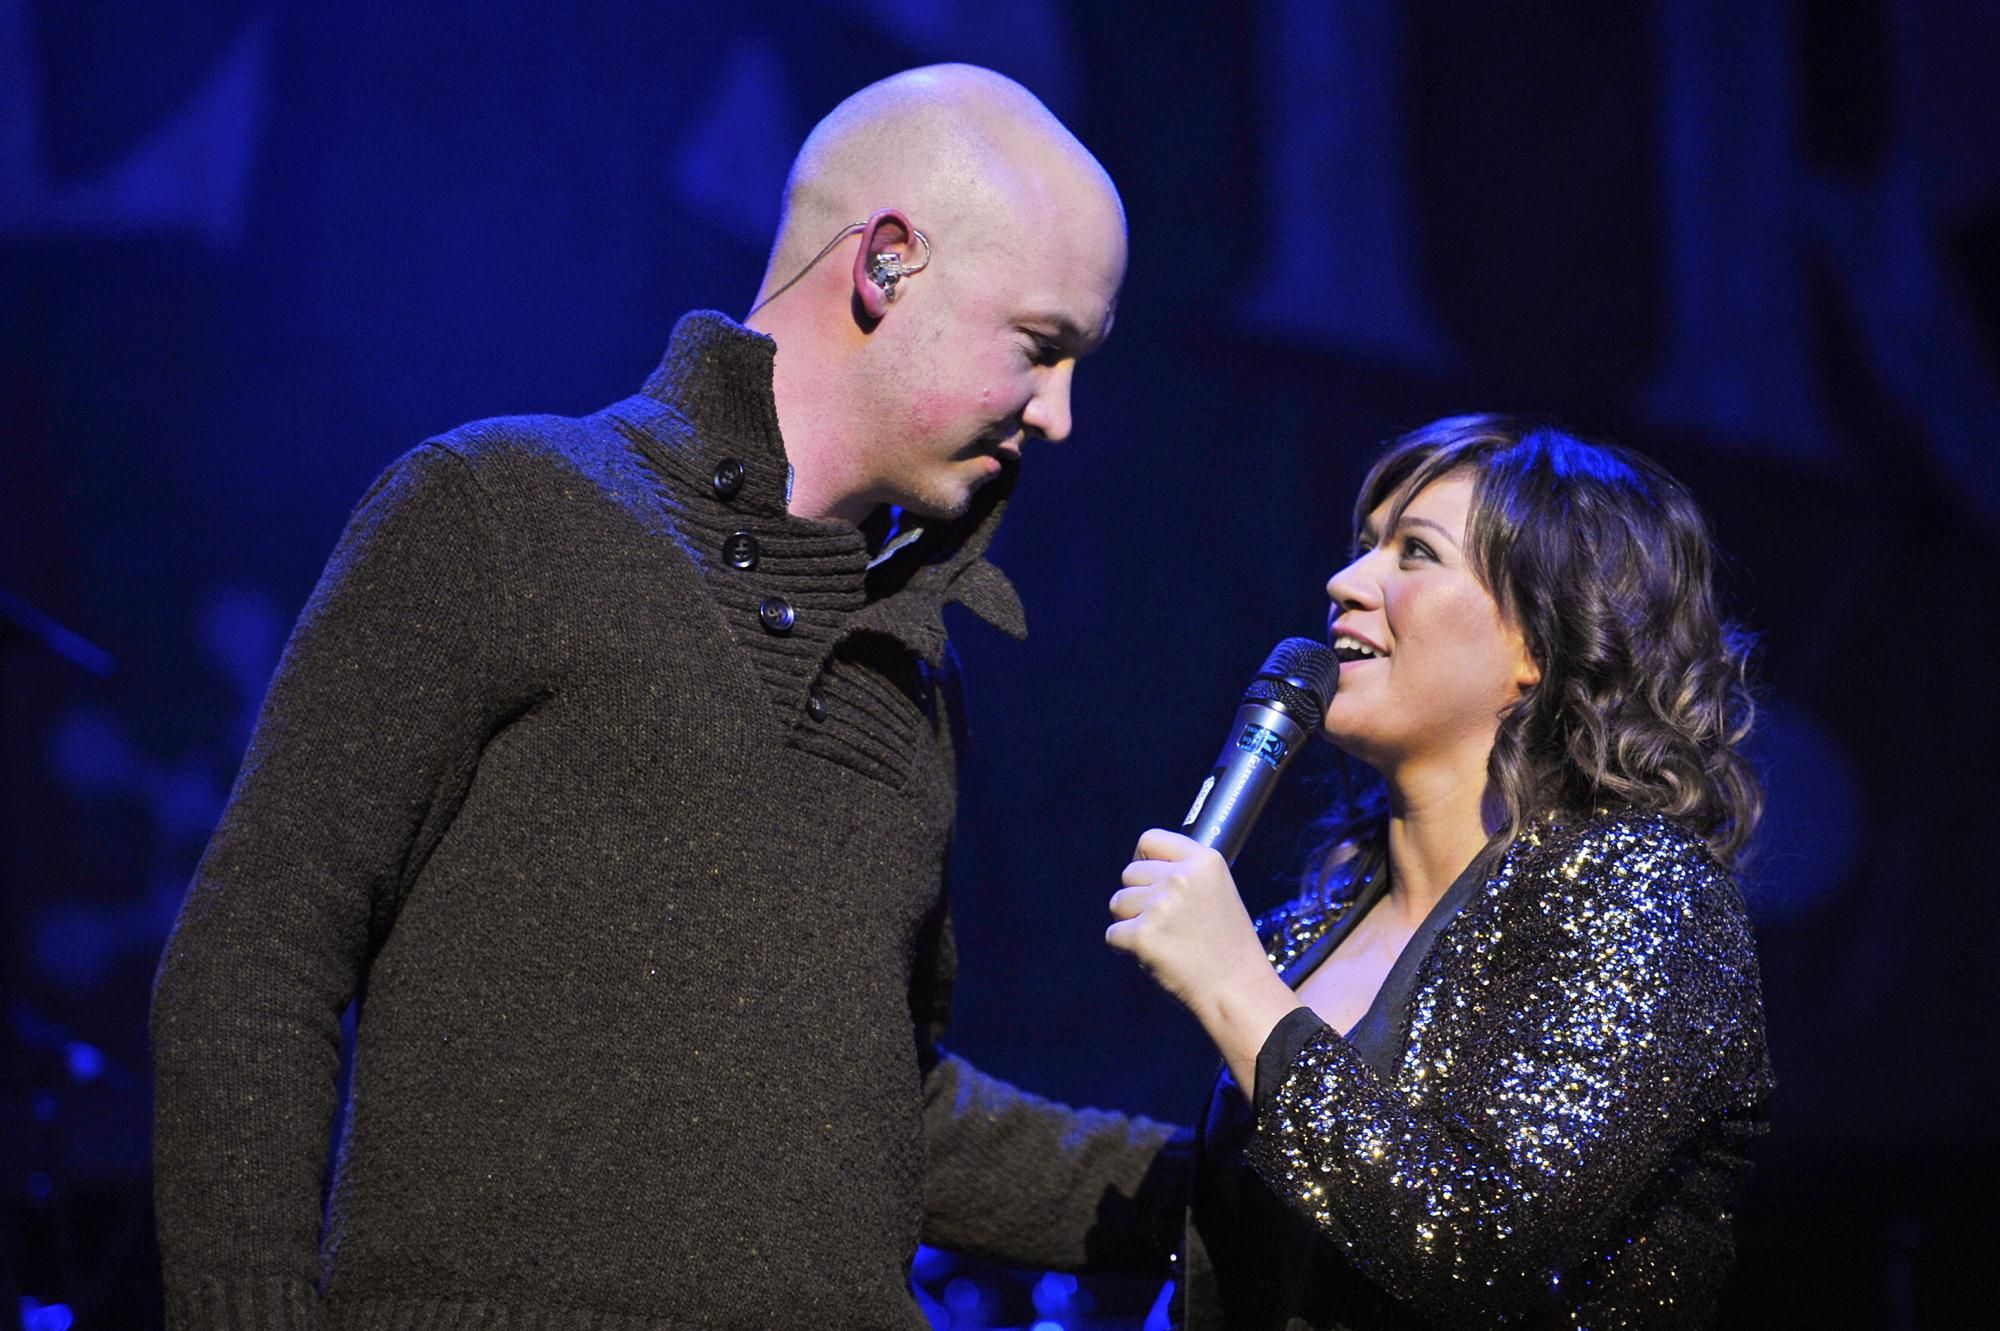 The Fray - Kelly Clarkson,Christina Perri Performances at the Chicago Theatre | Picture 134794